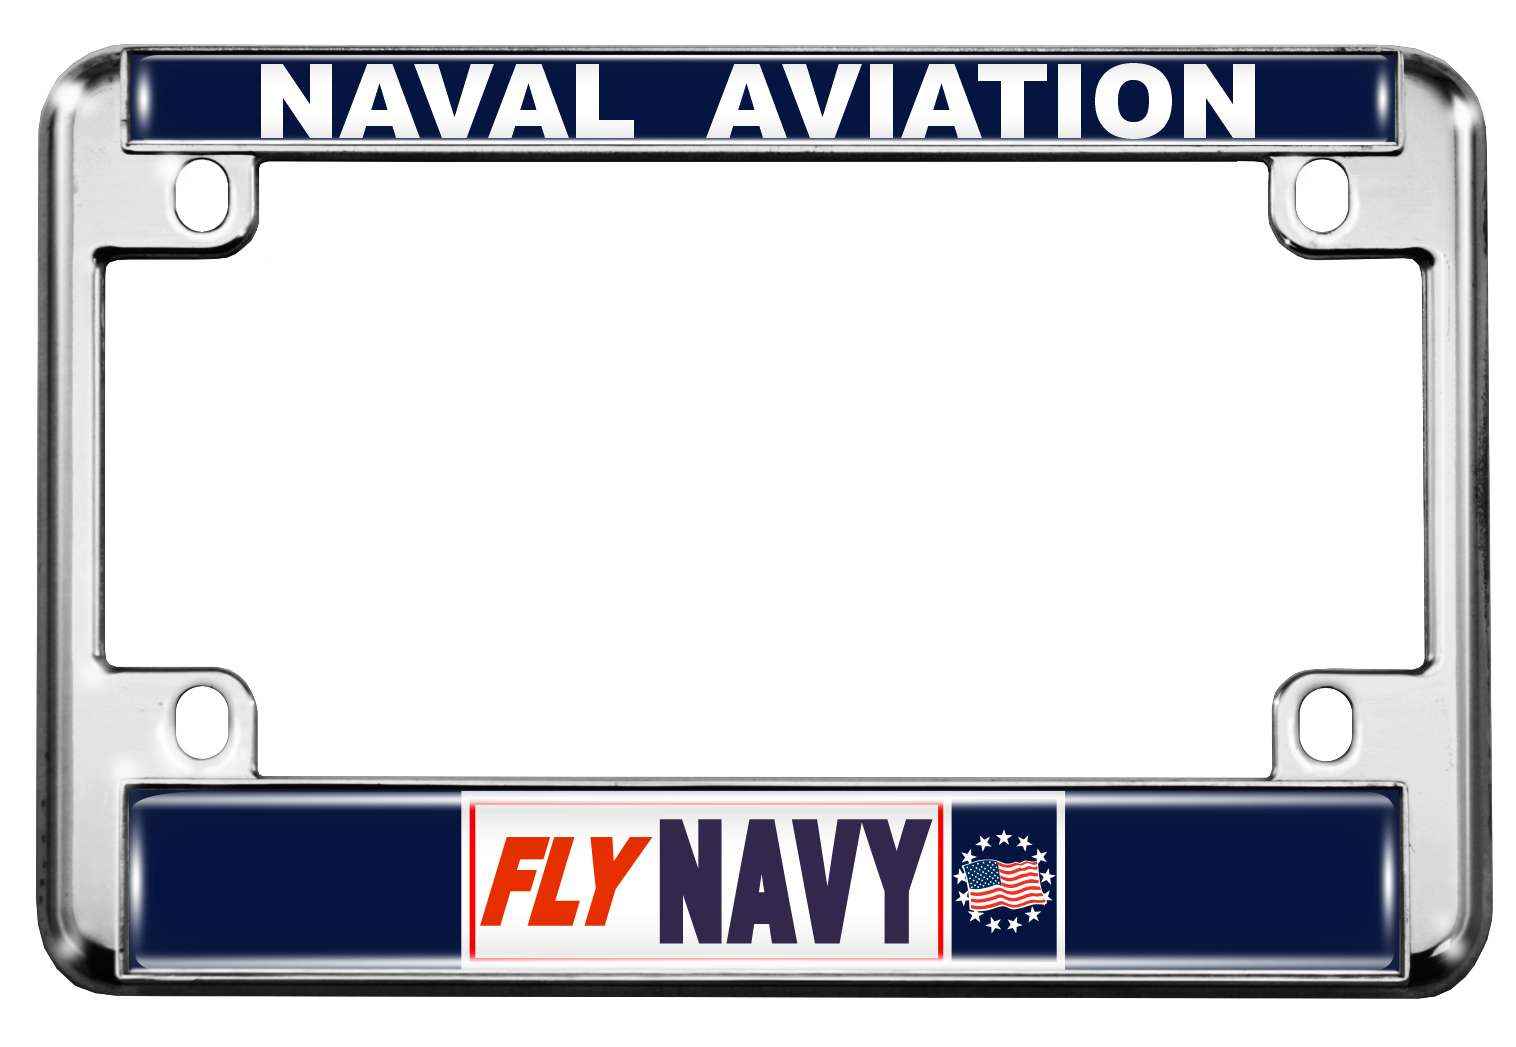 Naval Aviation - Fly Navy - Motorcycle Metal License Plate Frame